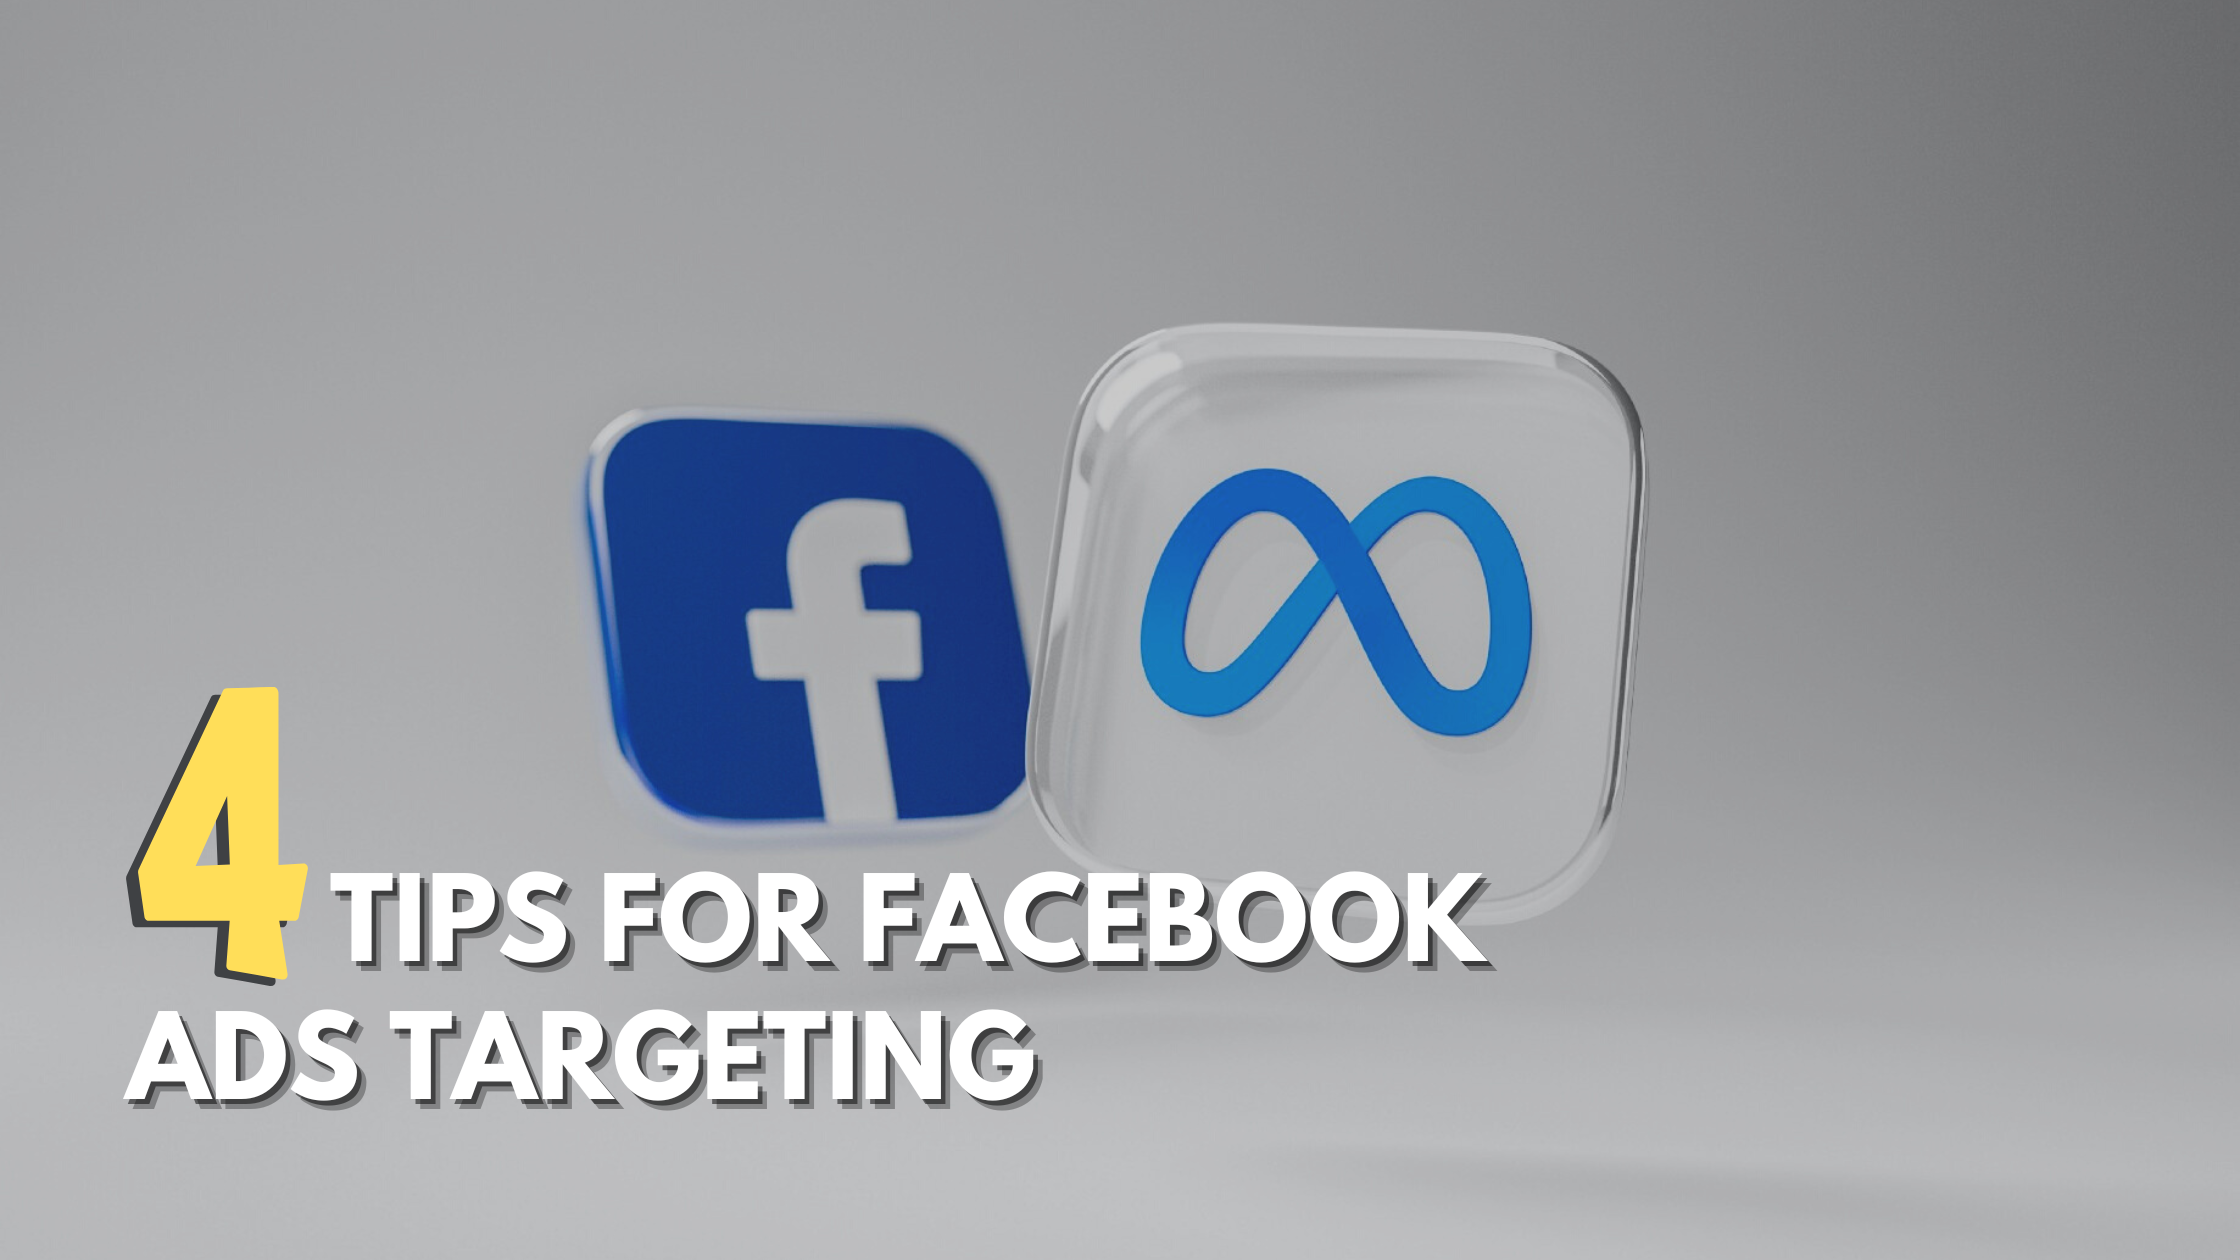 4 Tips For Facebook Ad Targeting